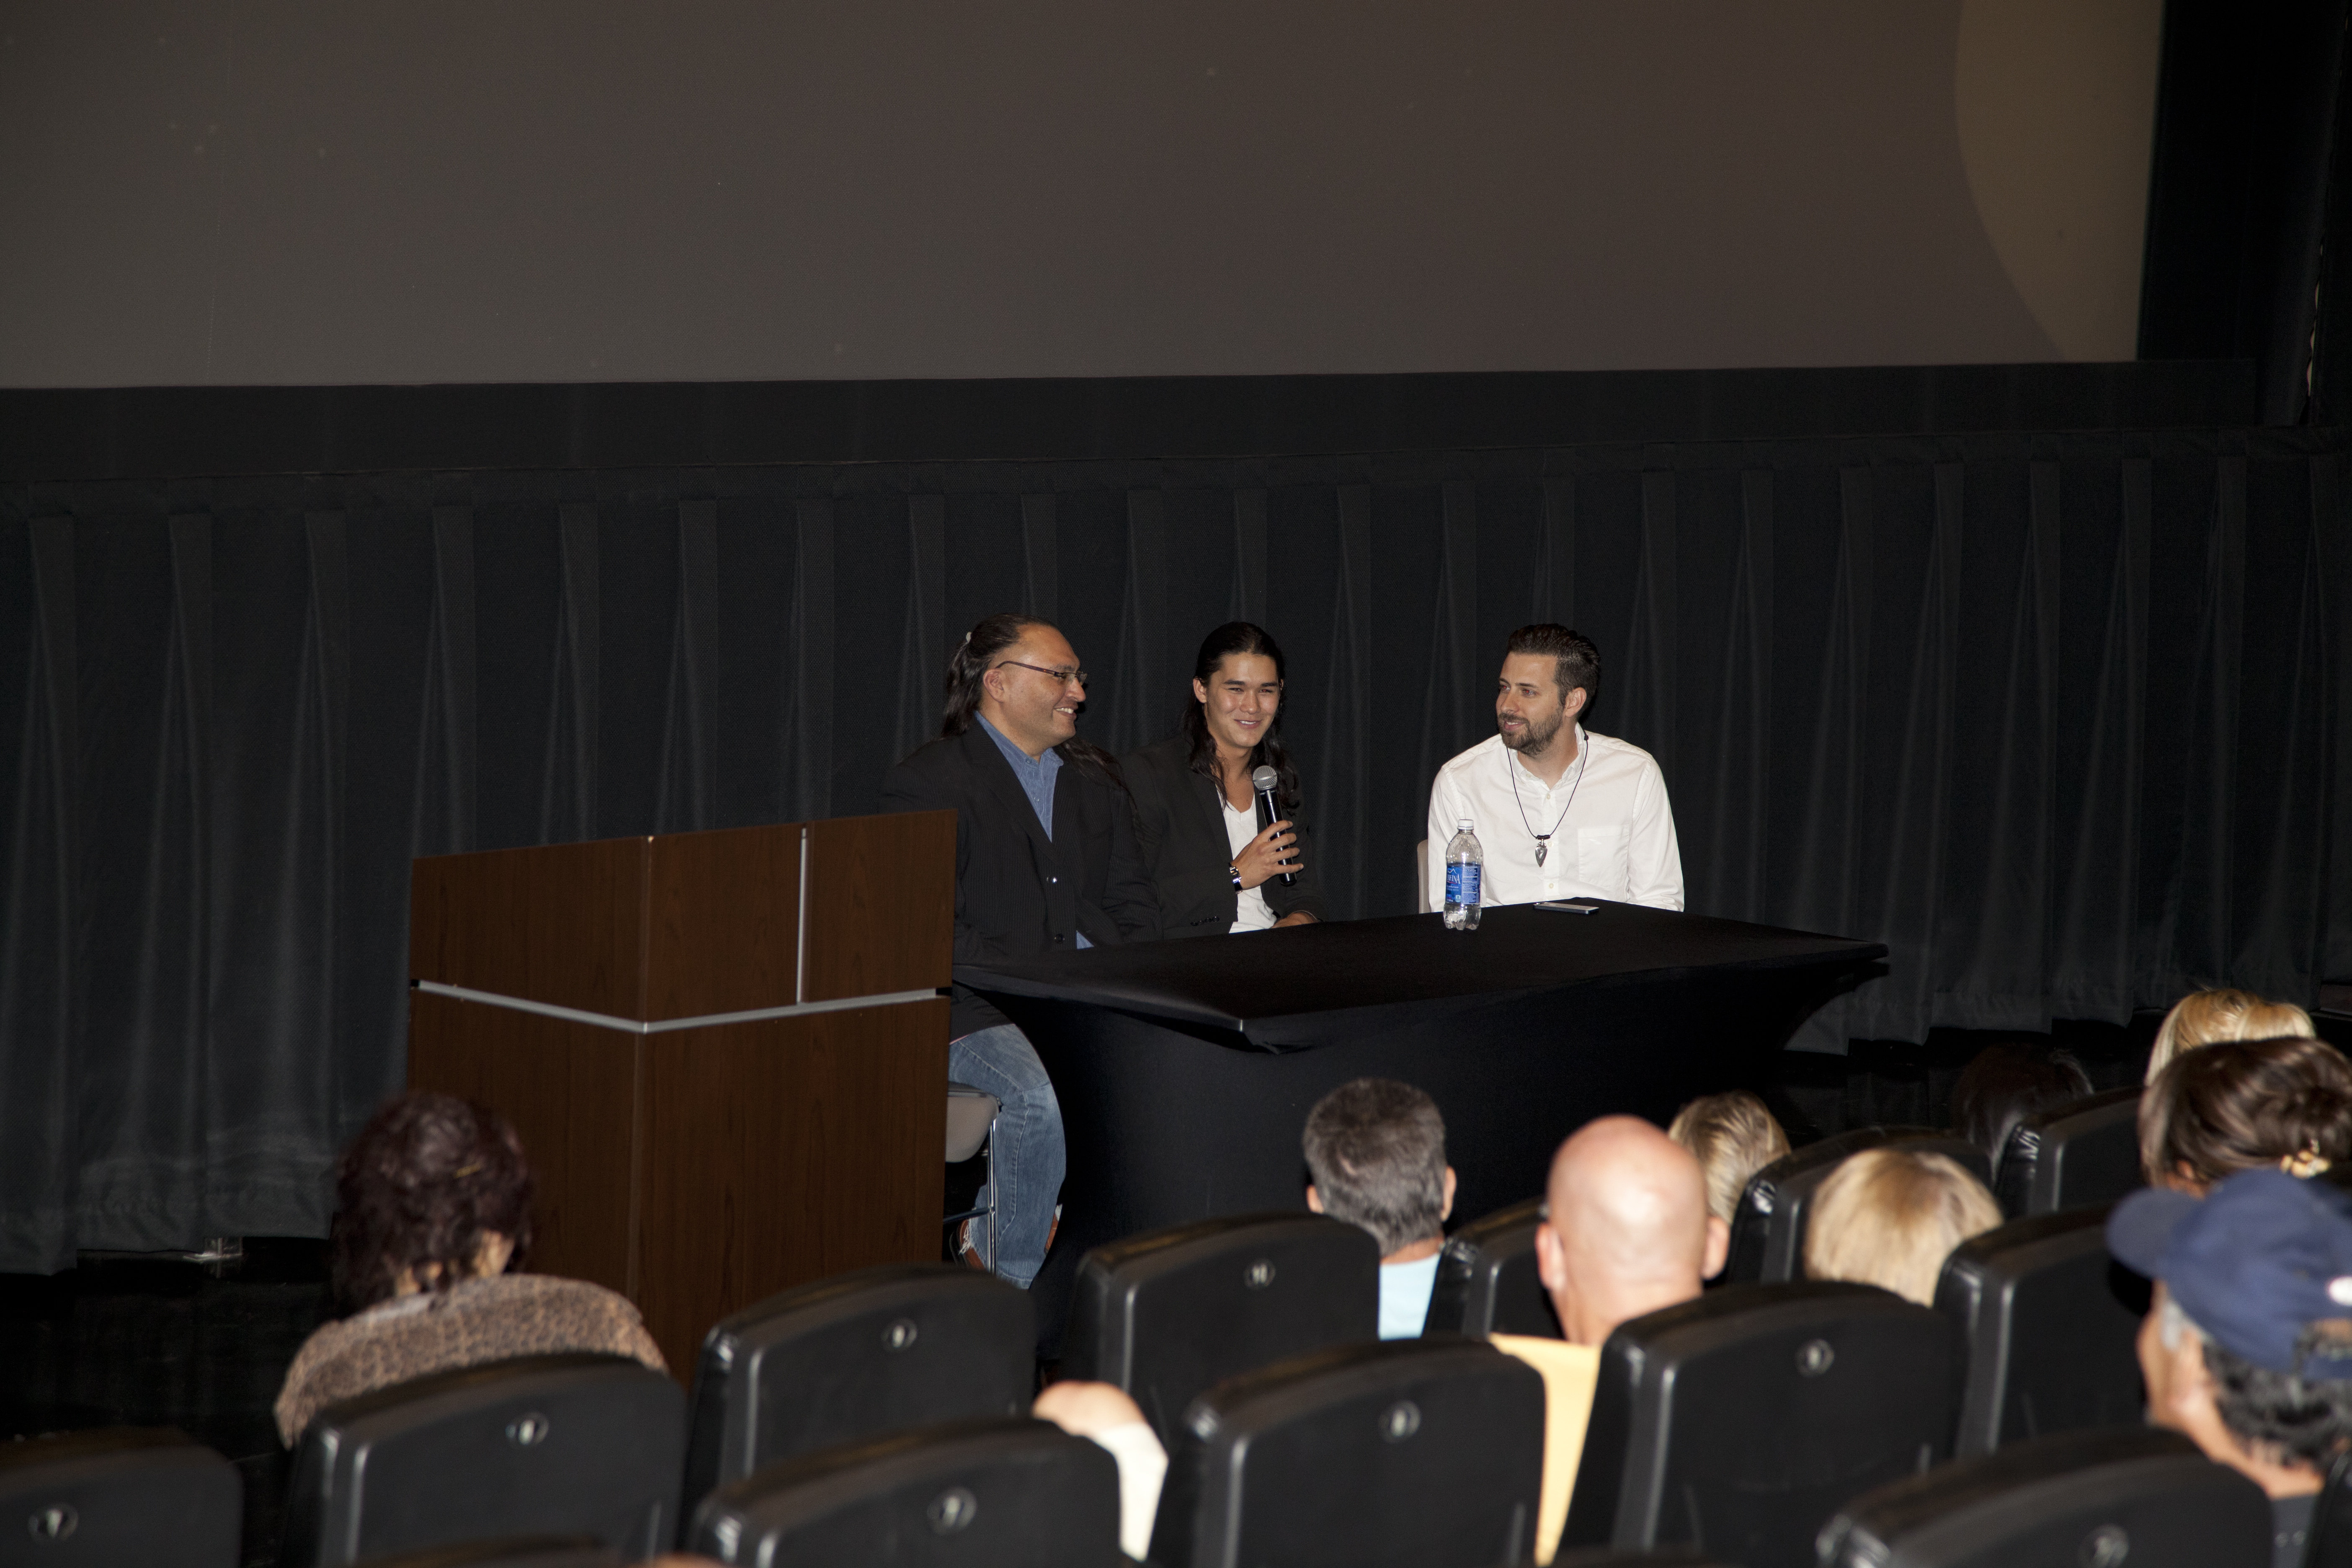 Booboo Stewart, Jon Proudstar and Brent Ryan Green at a Q&A session following the Running Deer premiere